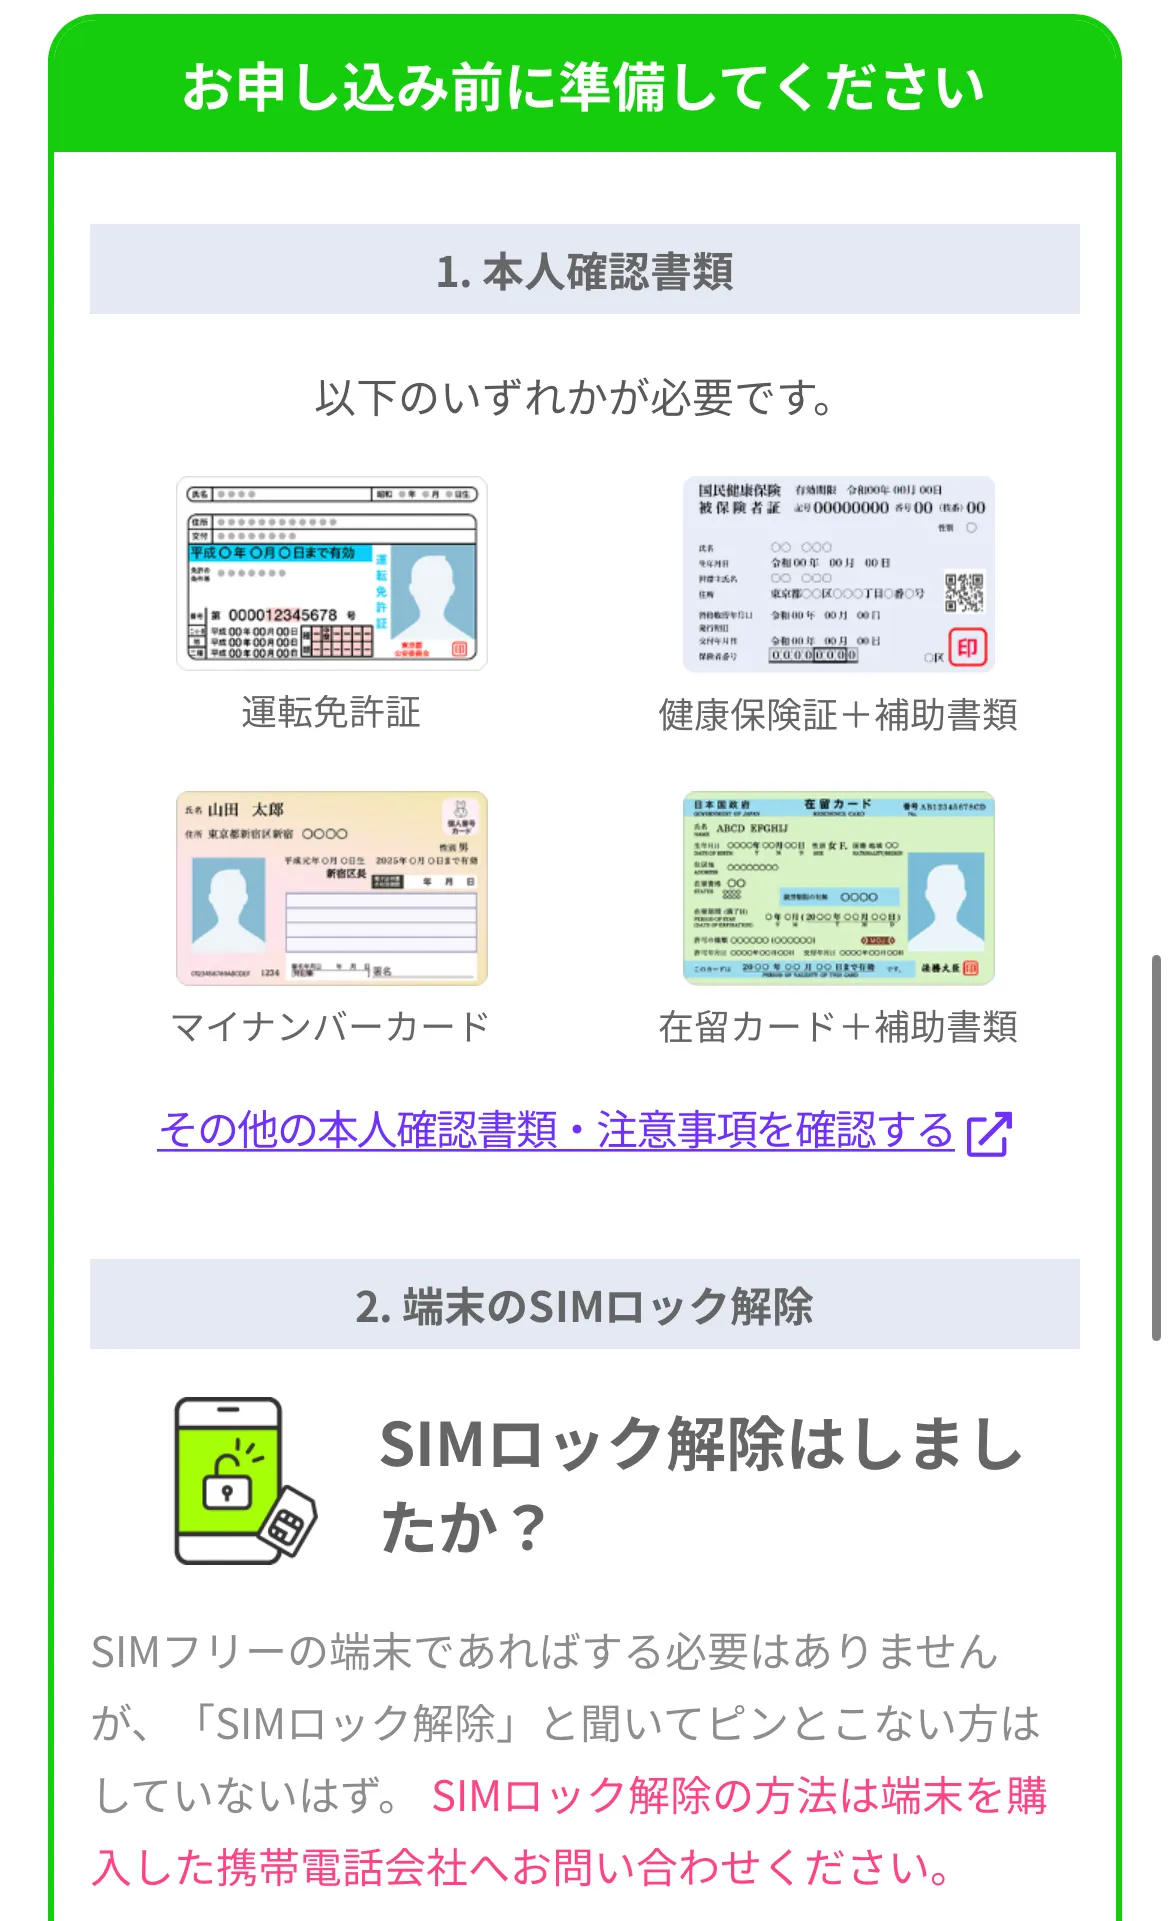 LINEMO 申し込み前の確認